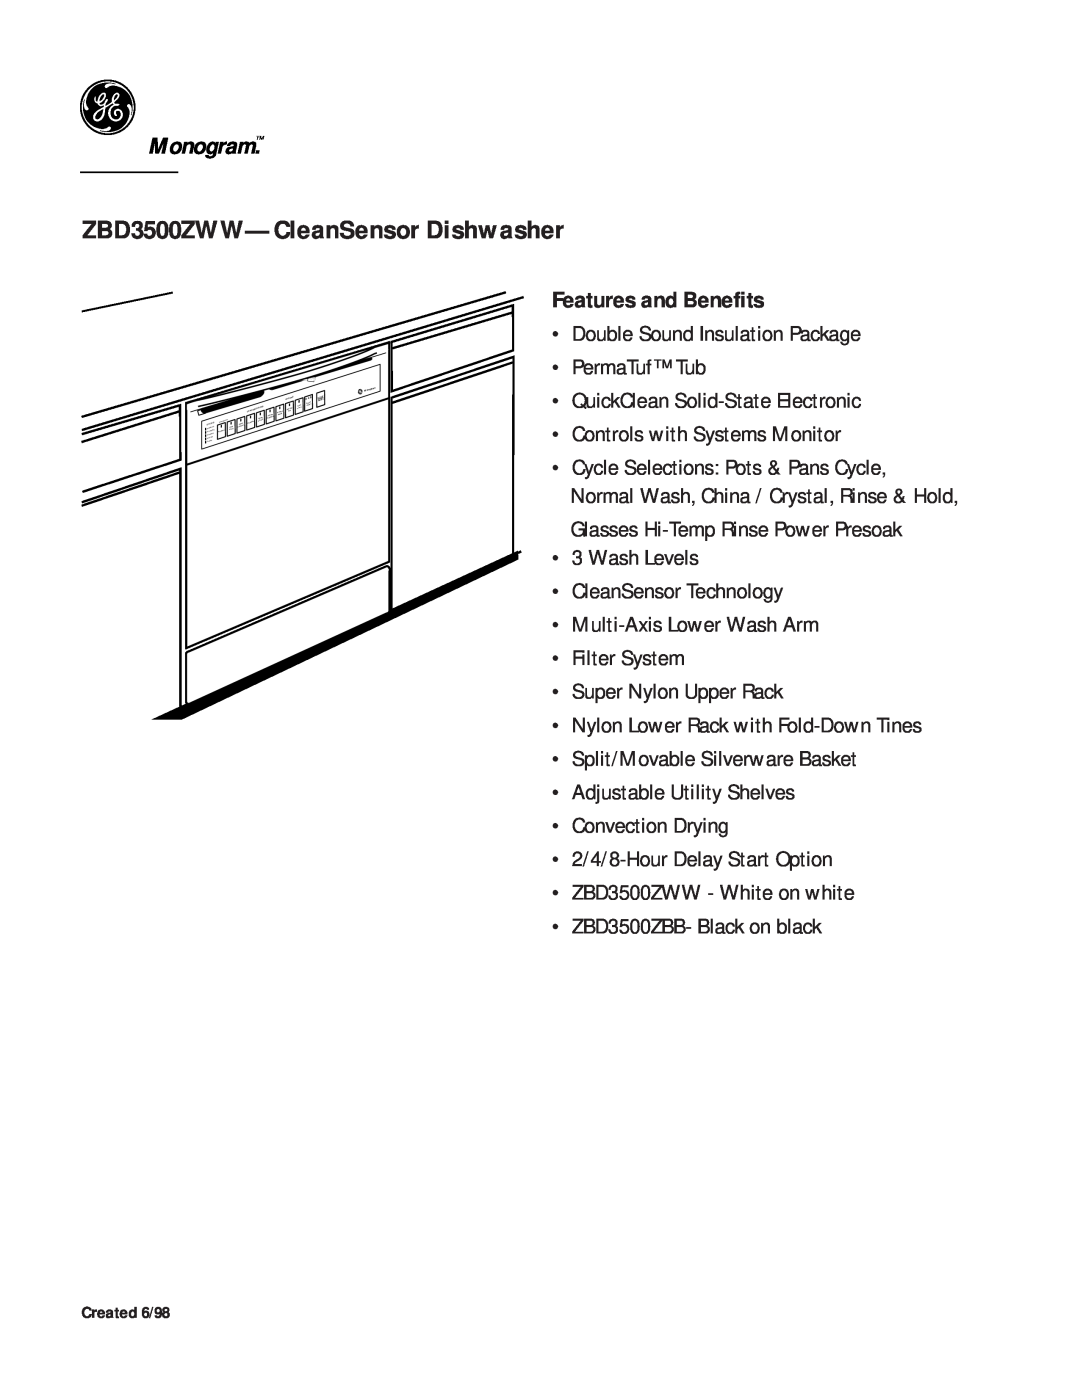 GE Monogram dimensions ZBD3500ZWW-CleanSensorDishwasher, Monogram, Features and Benefits 